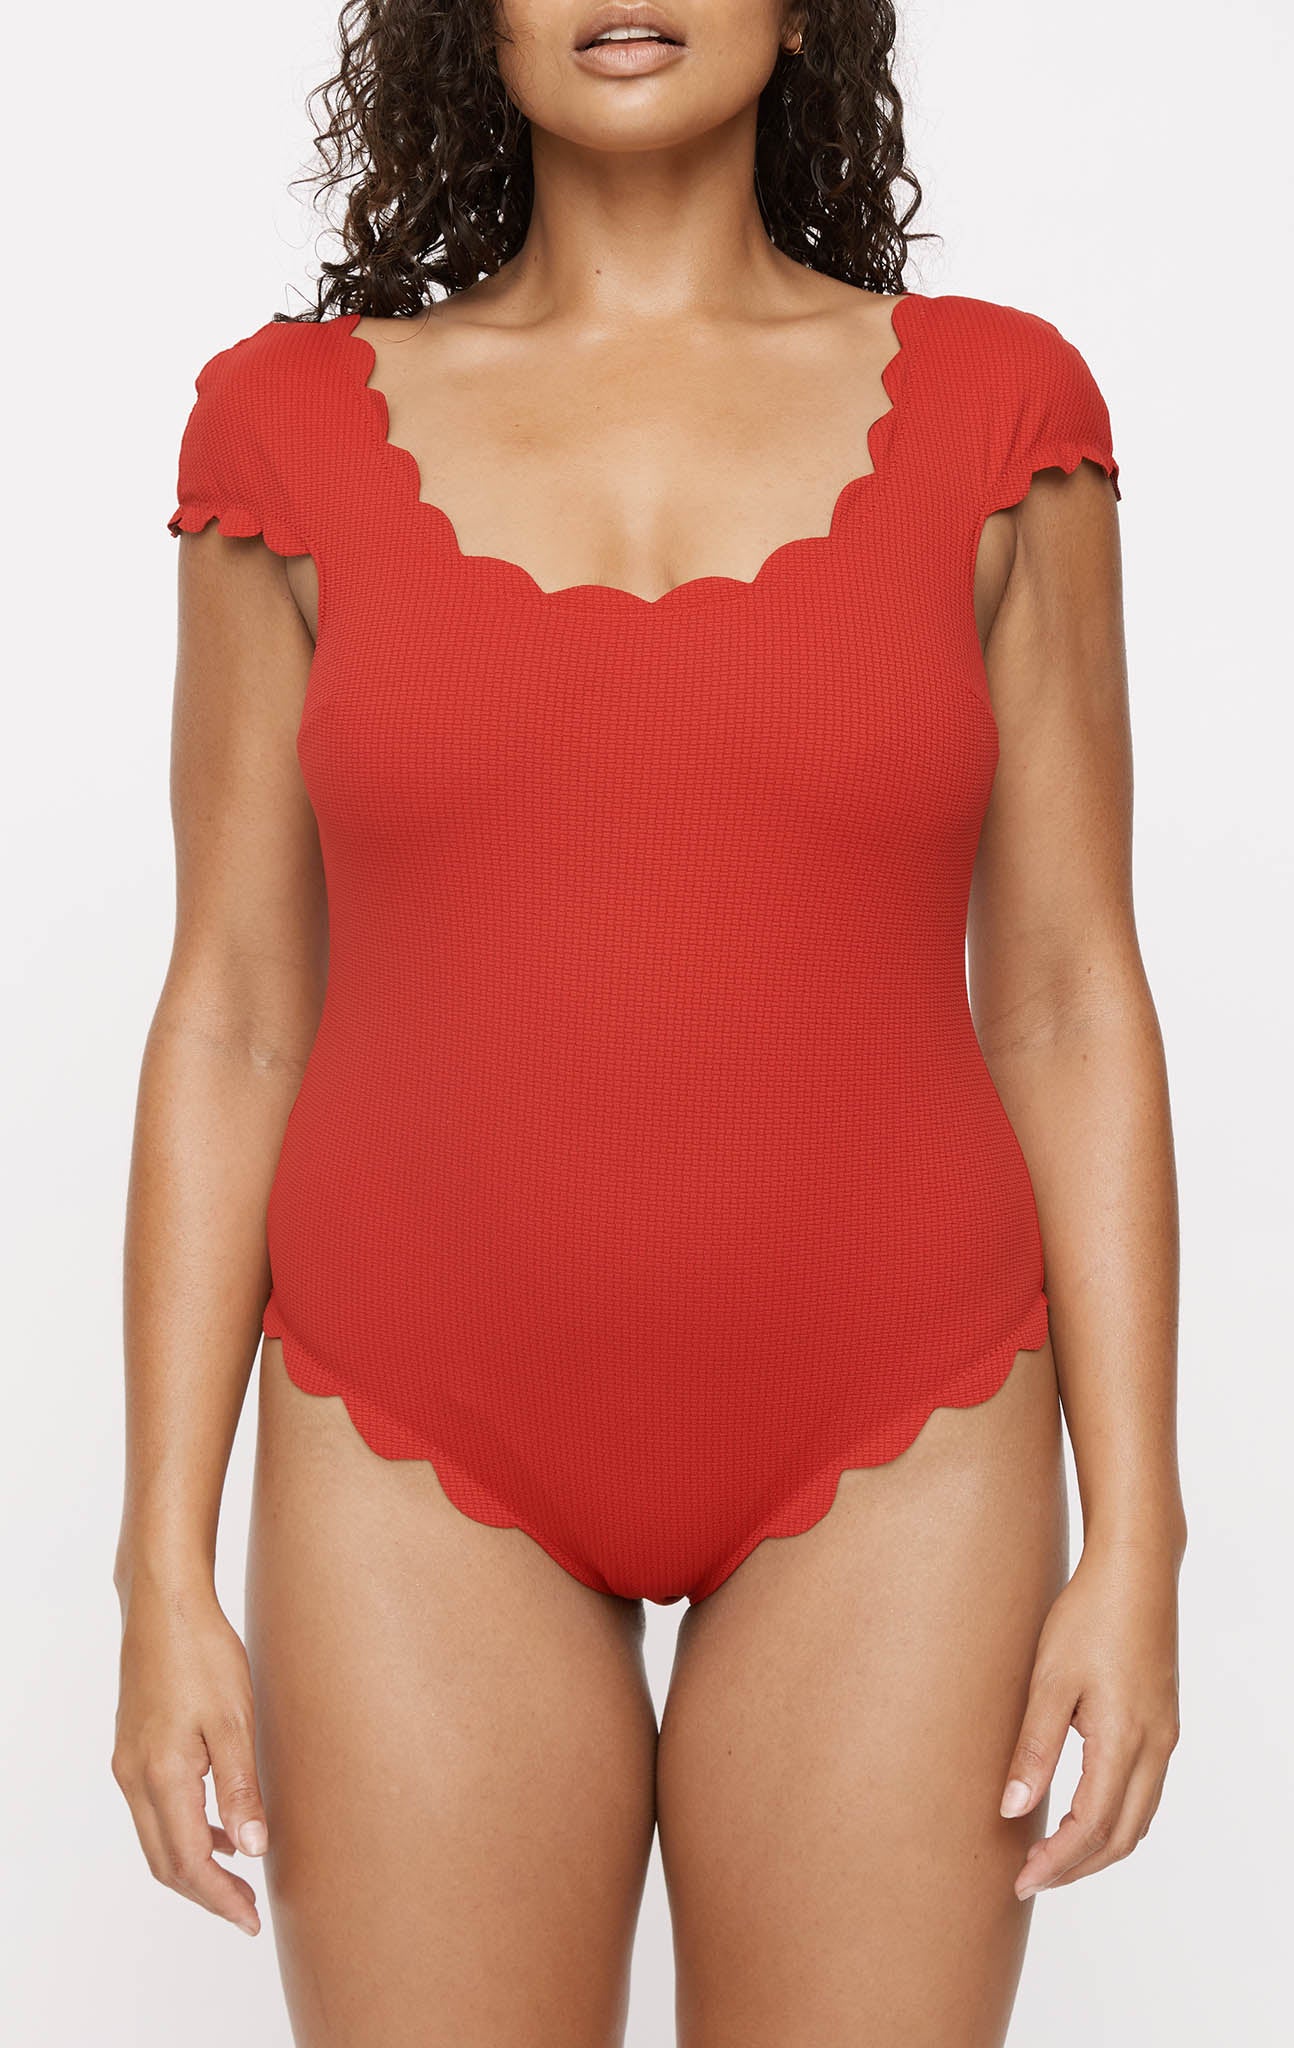 Scalloped Mexico Maillot in Scooter/Beet